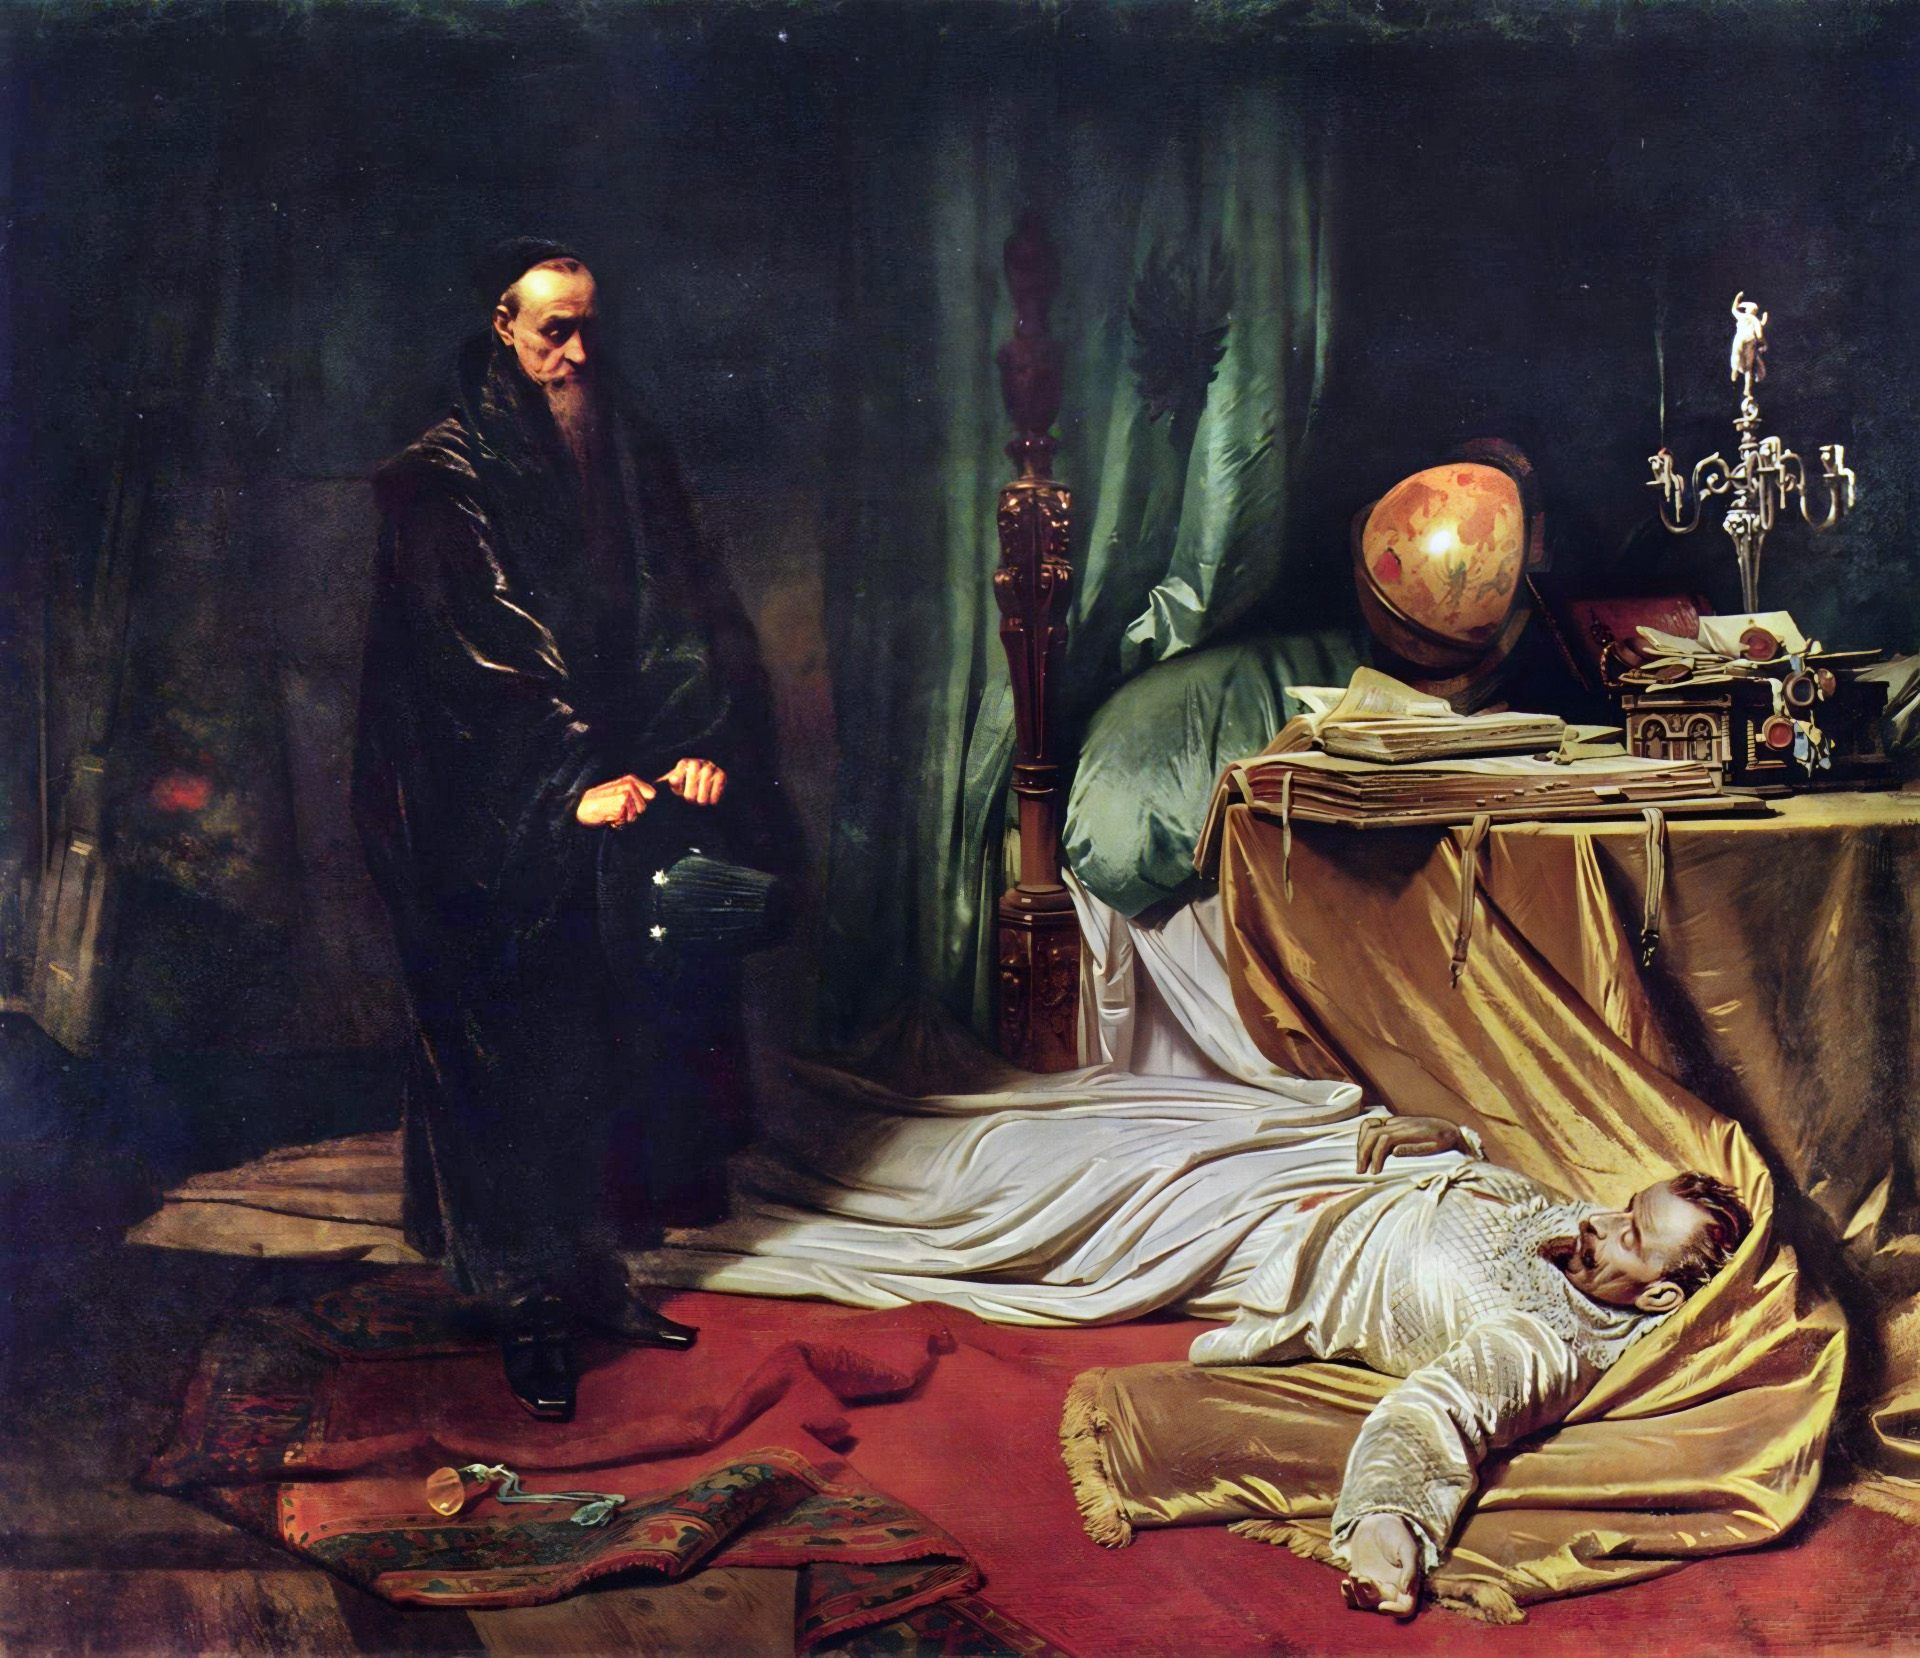 Court astrologer Seni stands watch over the body of Wallenstein, murdered at Eger in February 1634 on orders of Holy Roman Emperor Ferdinand II. Painting by Karl Theodor von Piloty.